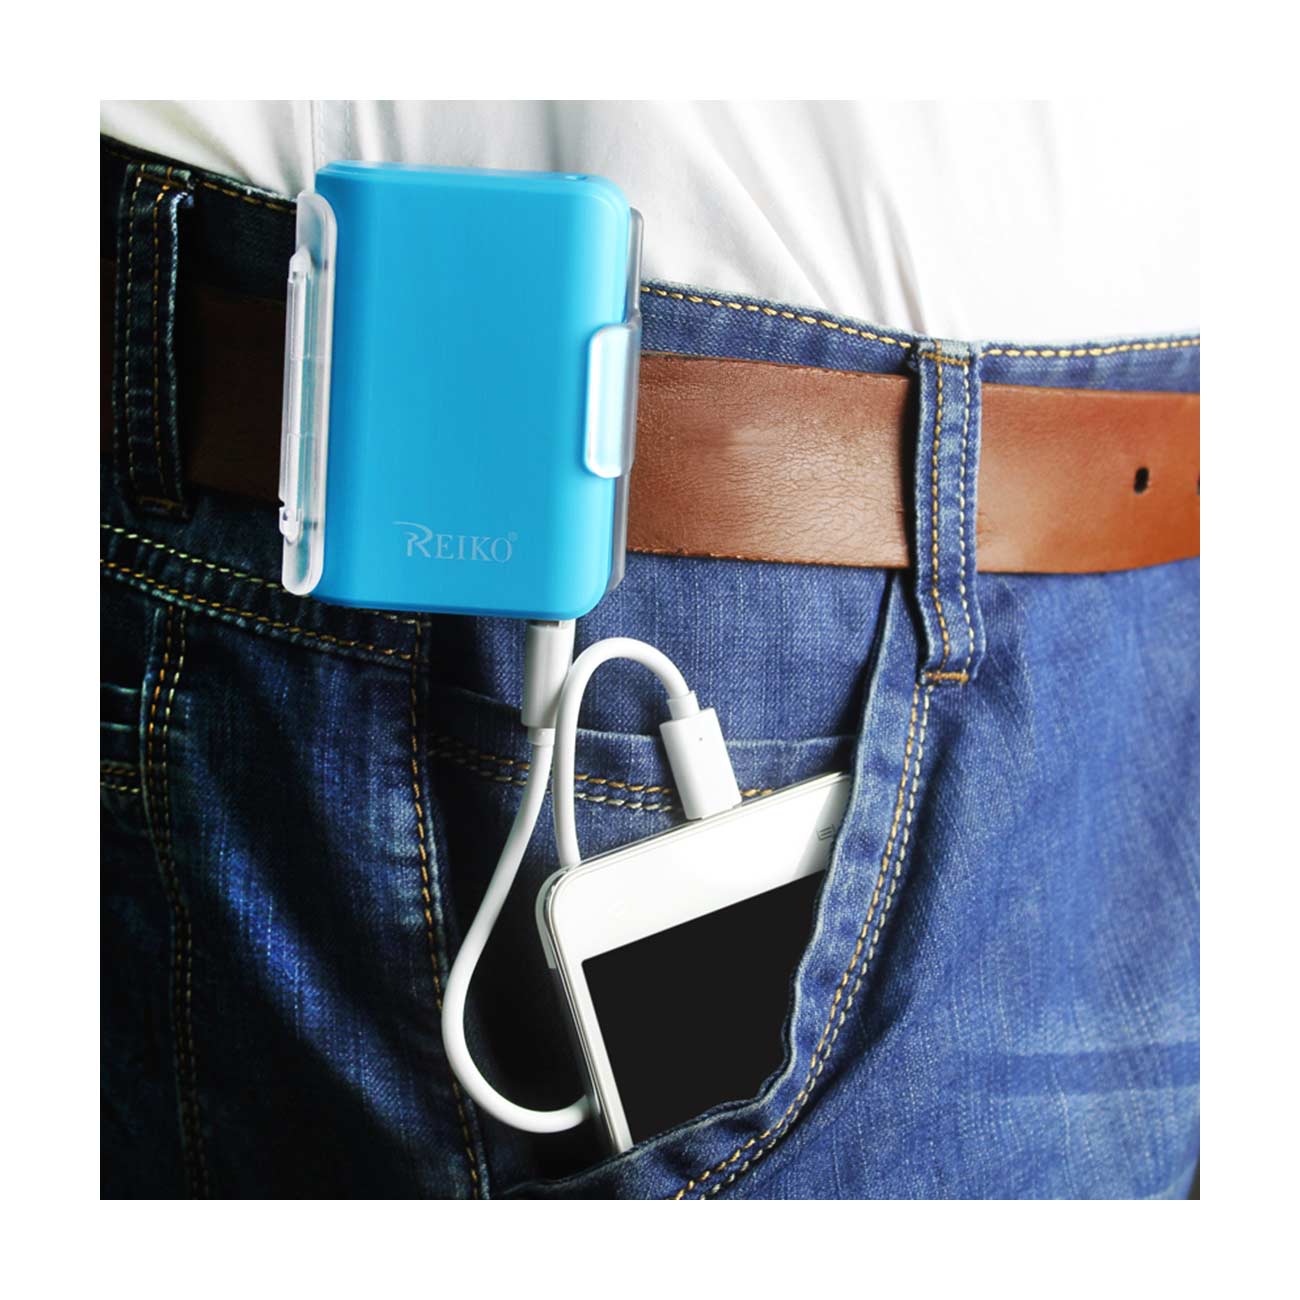 4000Mah Universal Power Bank With Cable In Blue